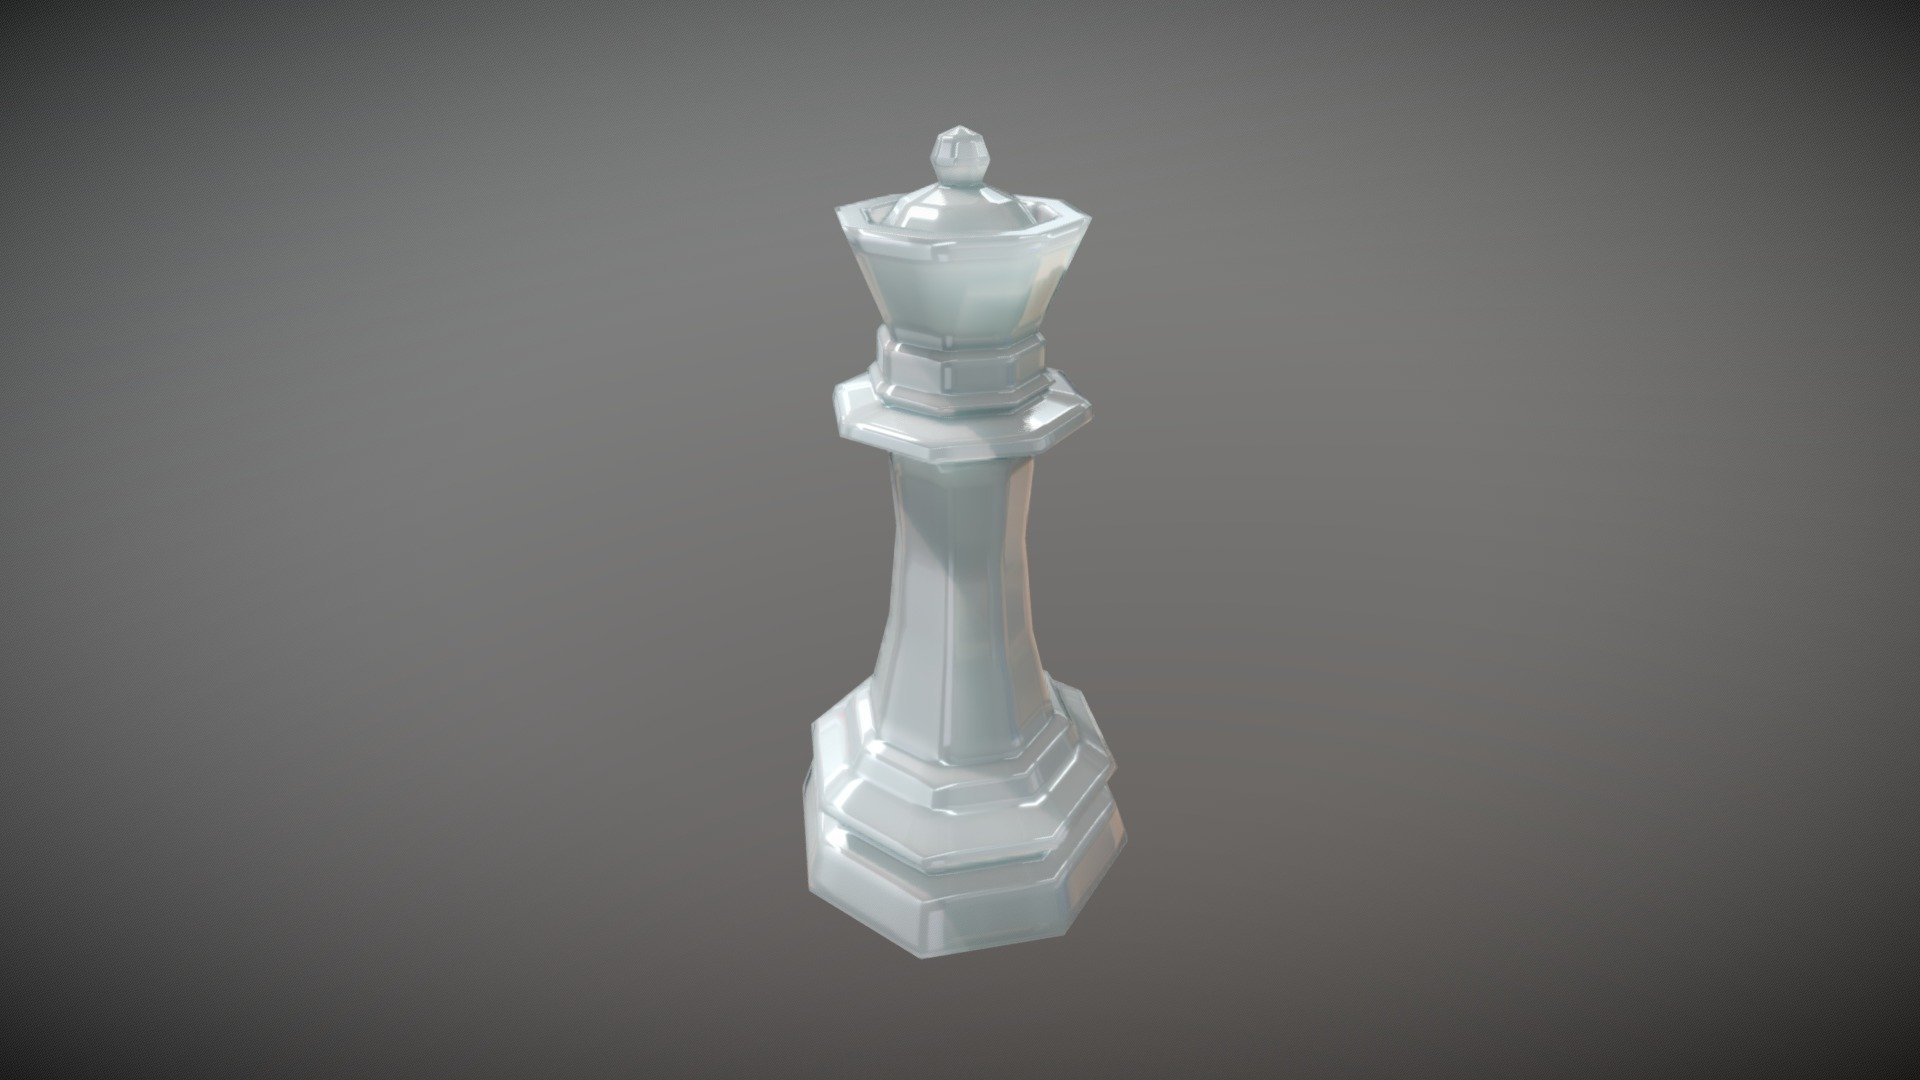 A chess queen piece made specifically for the DigiComp MUNI course as an example of a shareable digital object 3d model